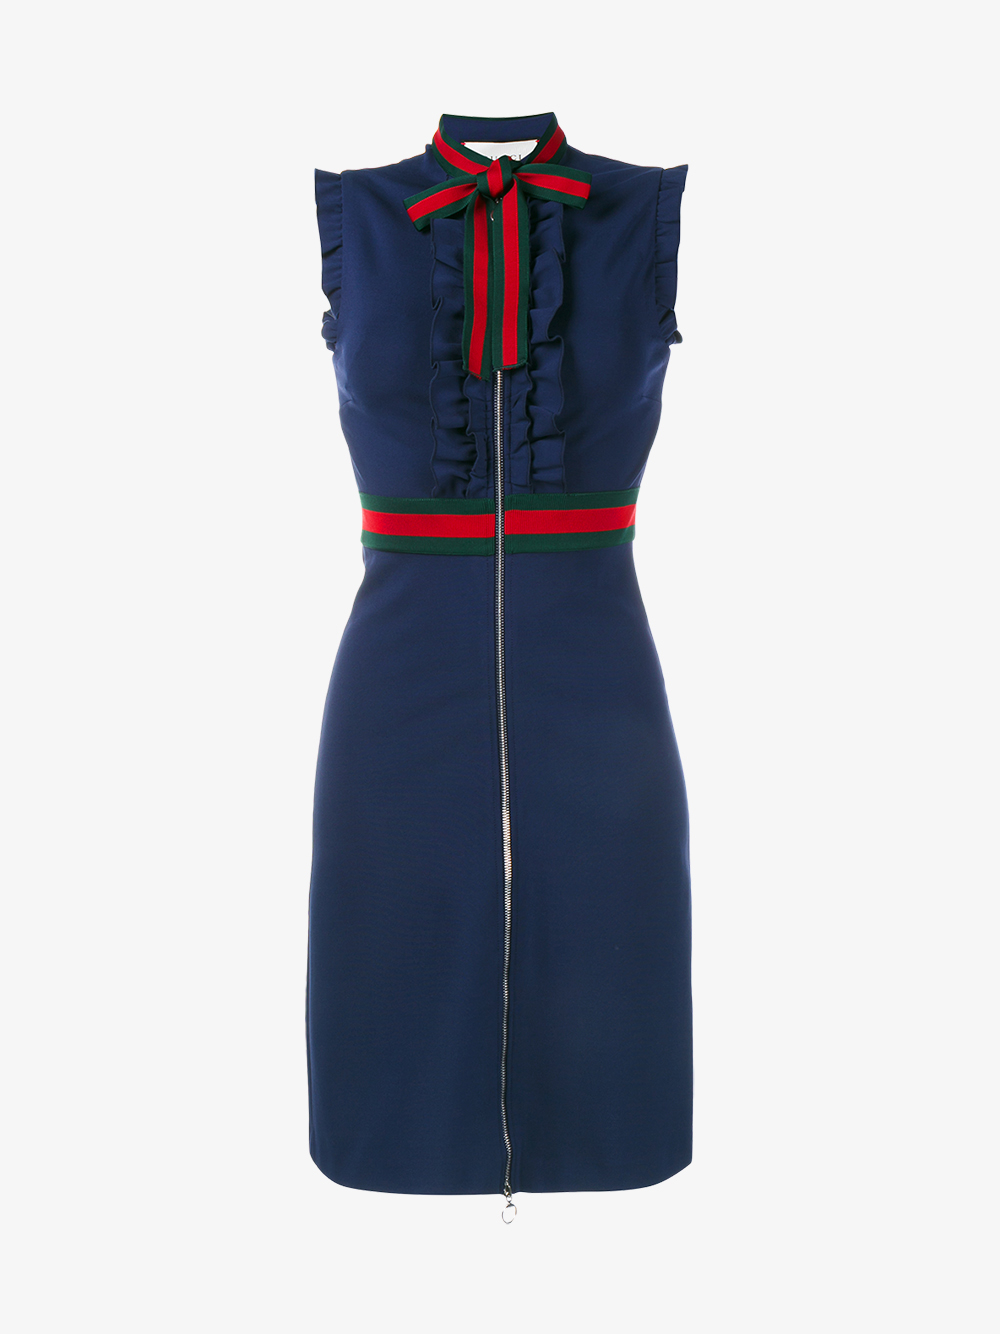 Gucci Synthetic Sleeveless Ruffled Dress in Navy (Blue) - Lyst